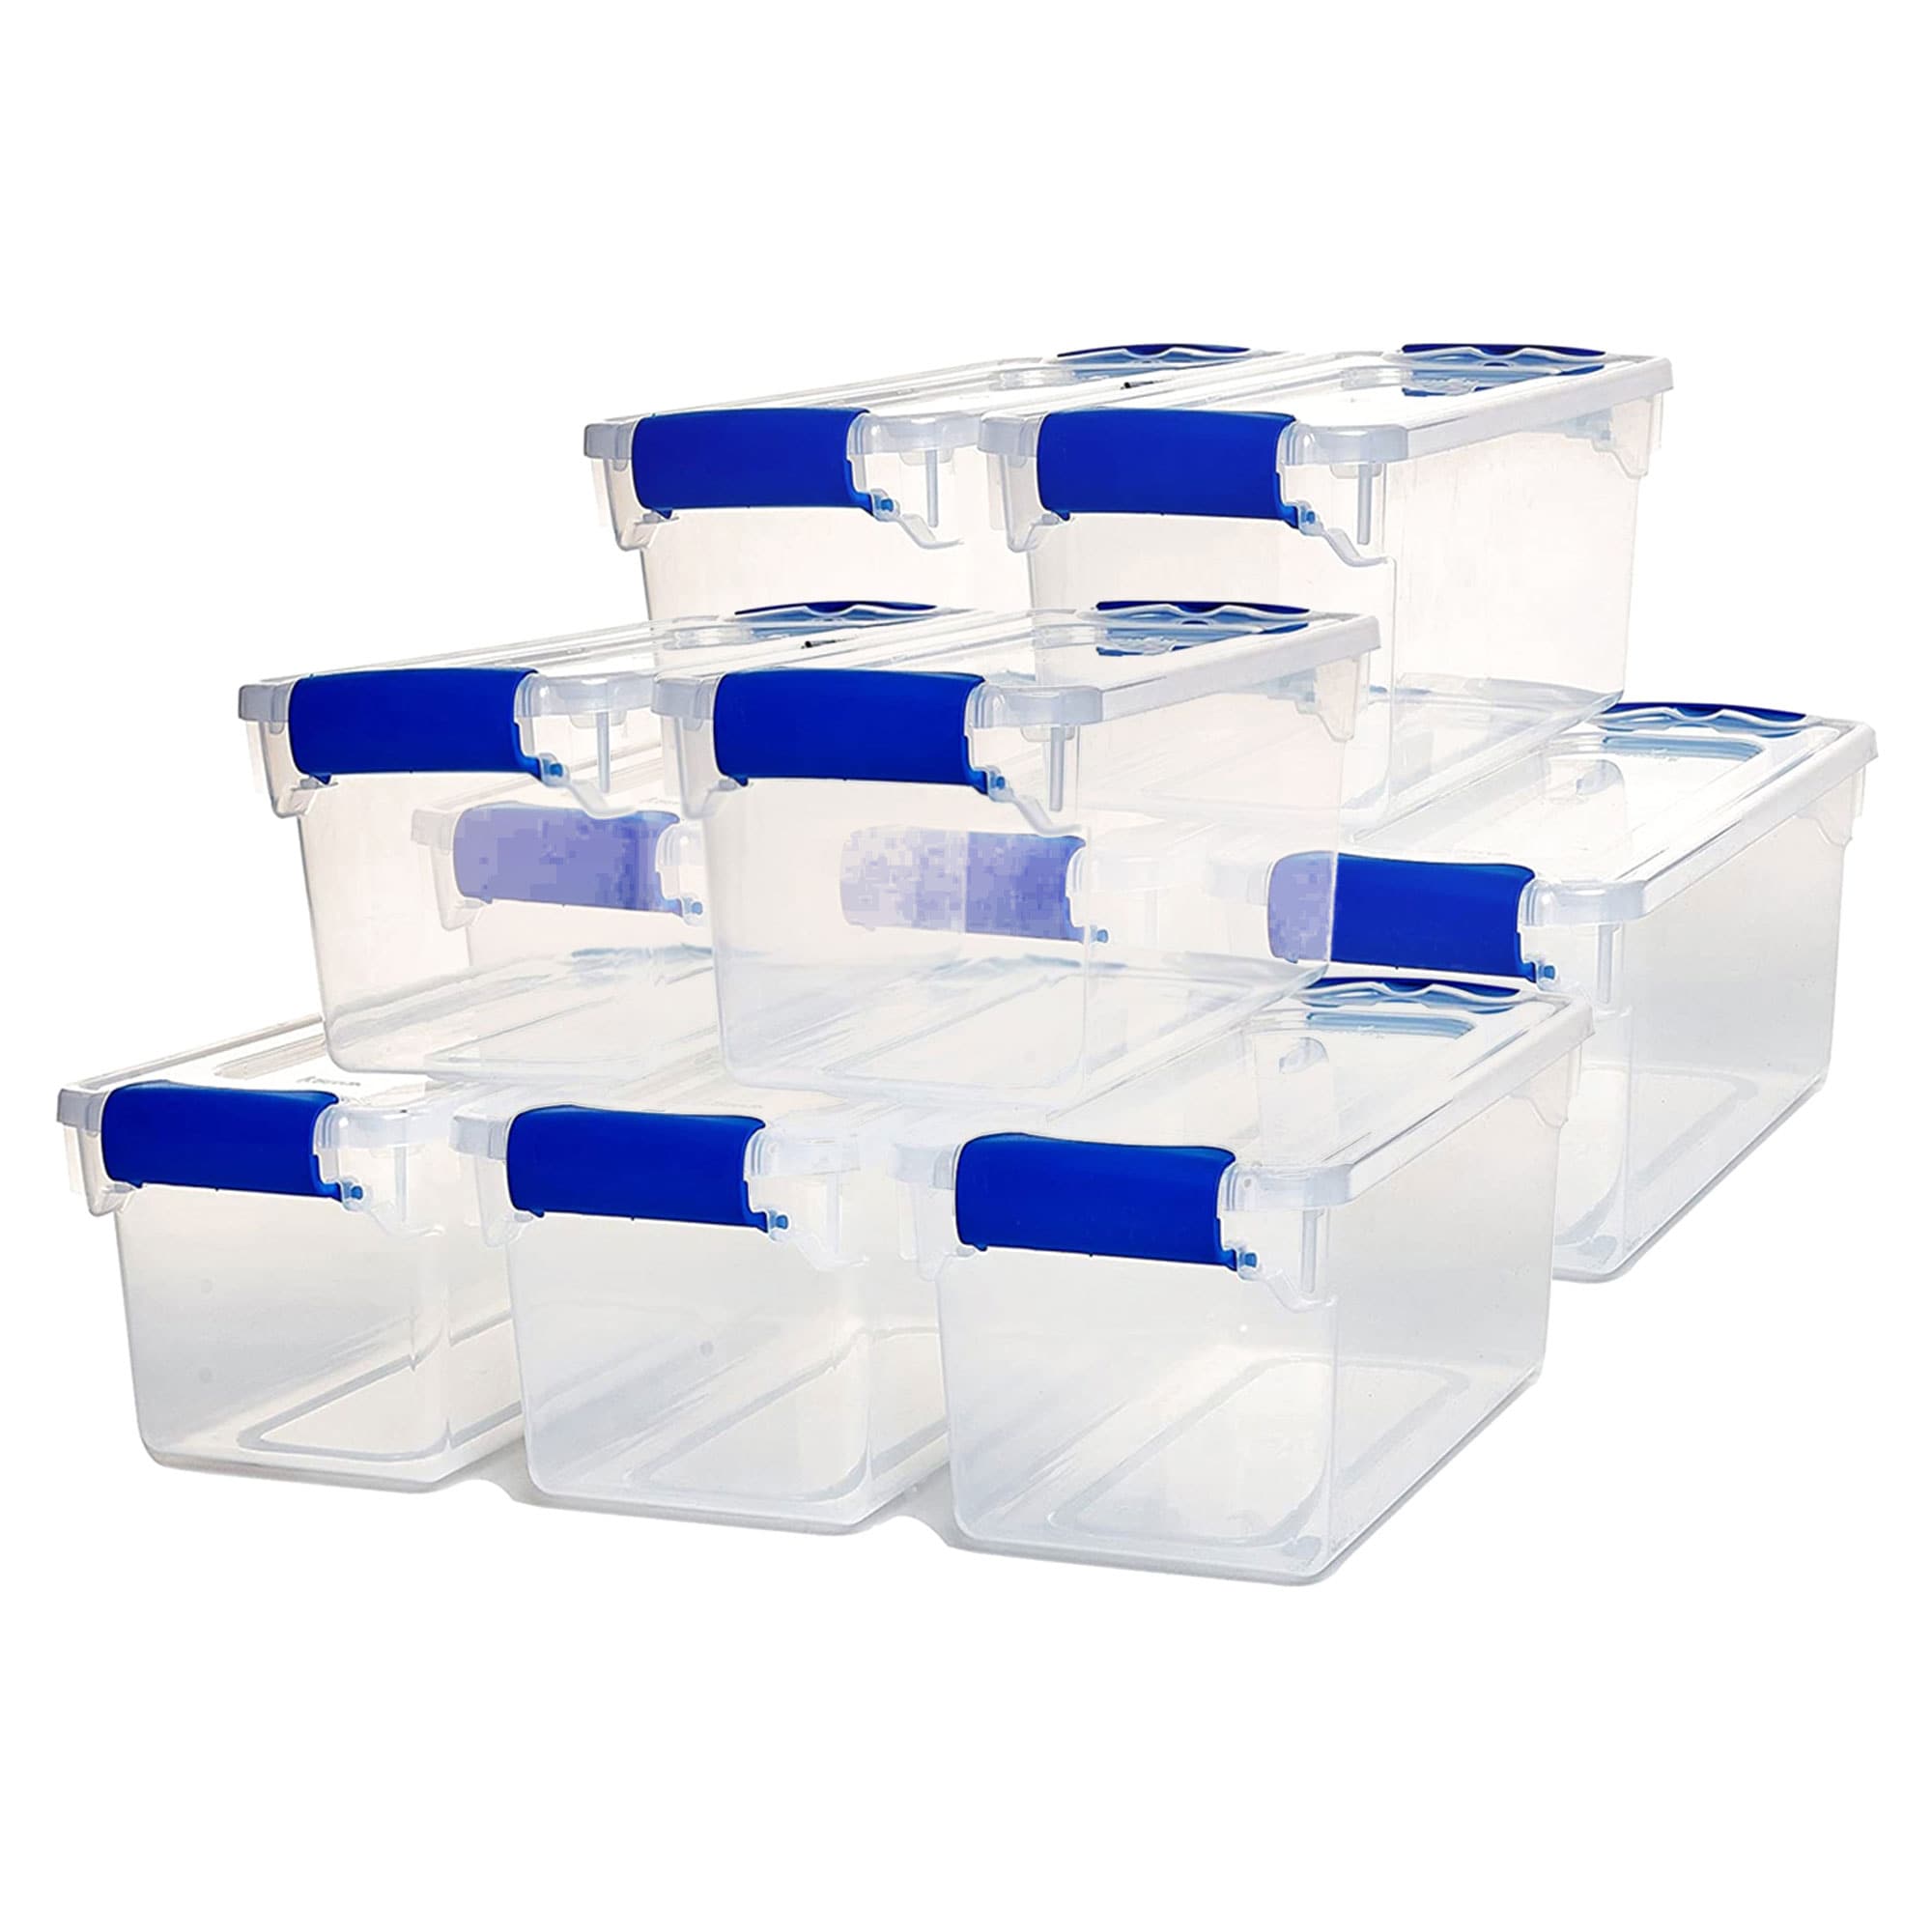 Homz 56 qt. Plastic Storage Tote with Latches Clear/Blue Set of 2